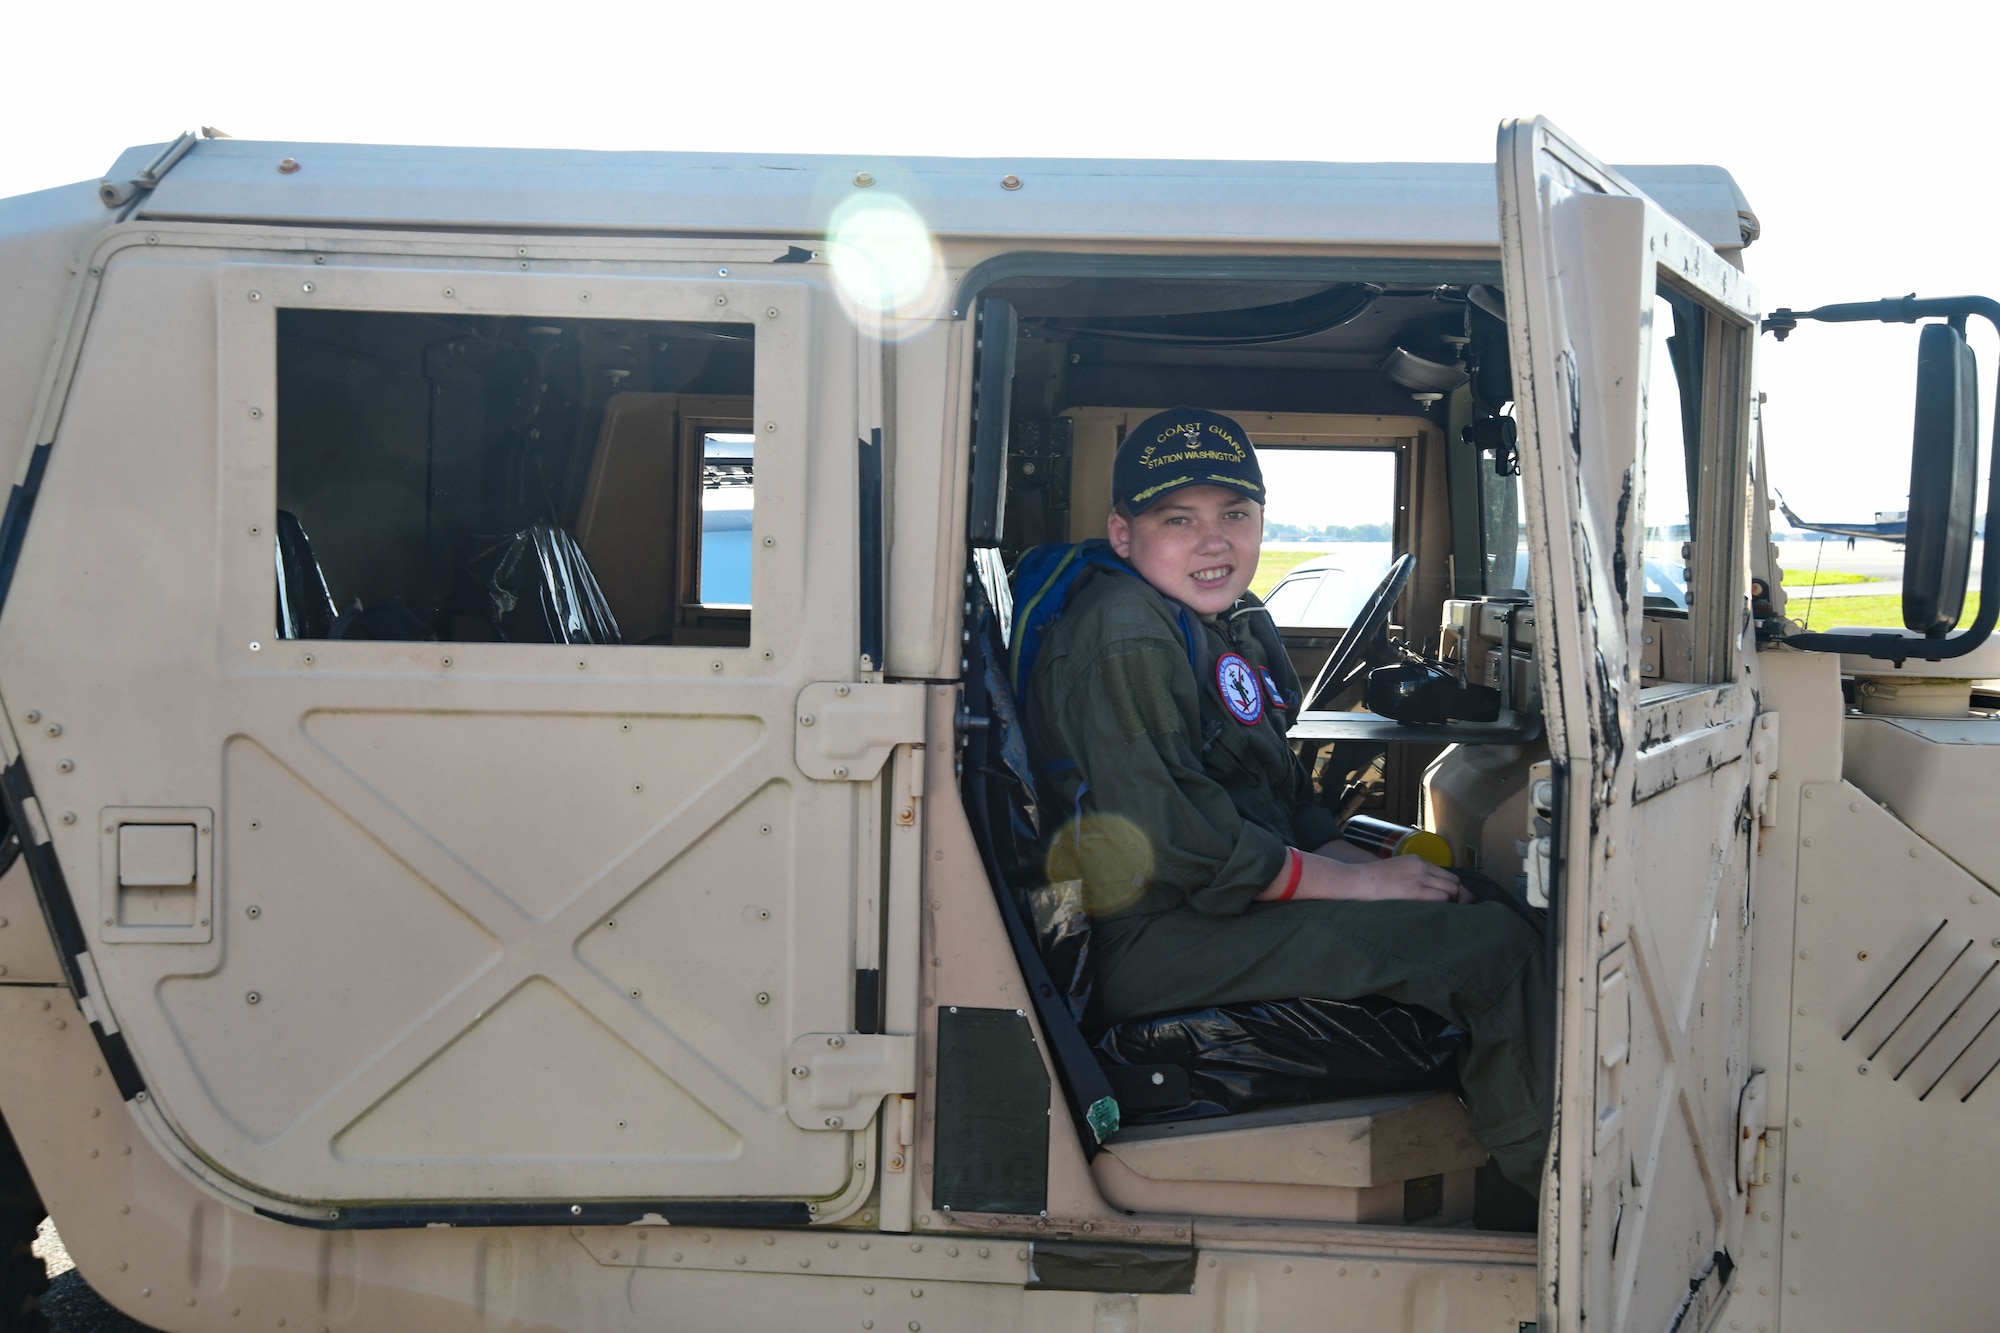 O’Rian Jolley, The Check-6 Foundation pilot for a day, sits in a Humvee on Joint Base Andrews, June 26, 2019. Diagnosed with hydrocephalus, severe gastro-esophageal reflux and most recently an extremely rare primary carnitine deficiency and mitochondrial diseases of the brain, O’Rian was selected to be an honorary pilot to experience a day at JBA and the National Harbor. O’Rian wants to someday serve his country as an Aviation Survival Technician in the US Coast Guard. (U.S. Air National Guard photo by Erica Flores)